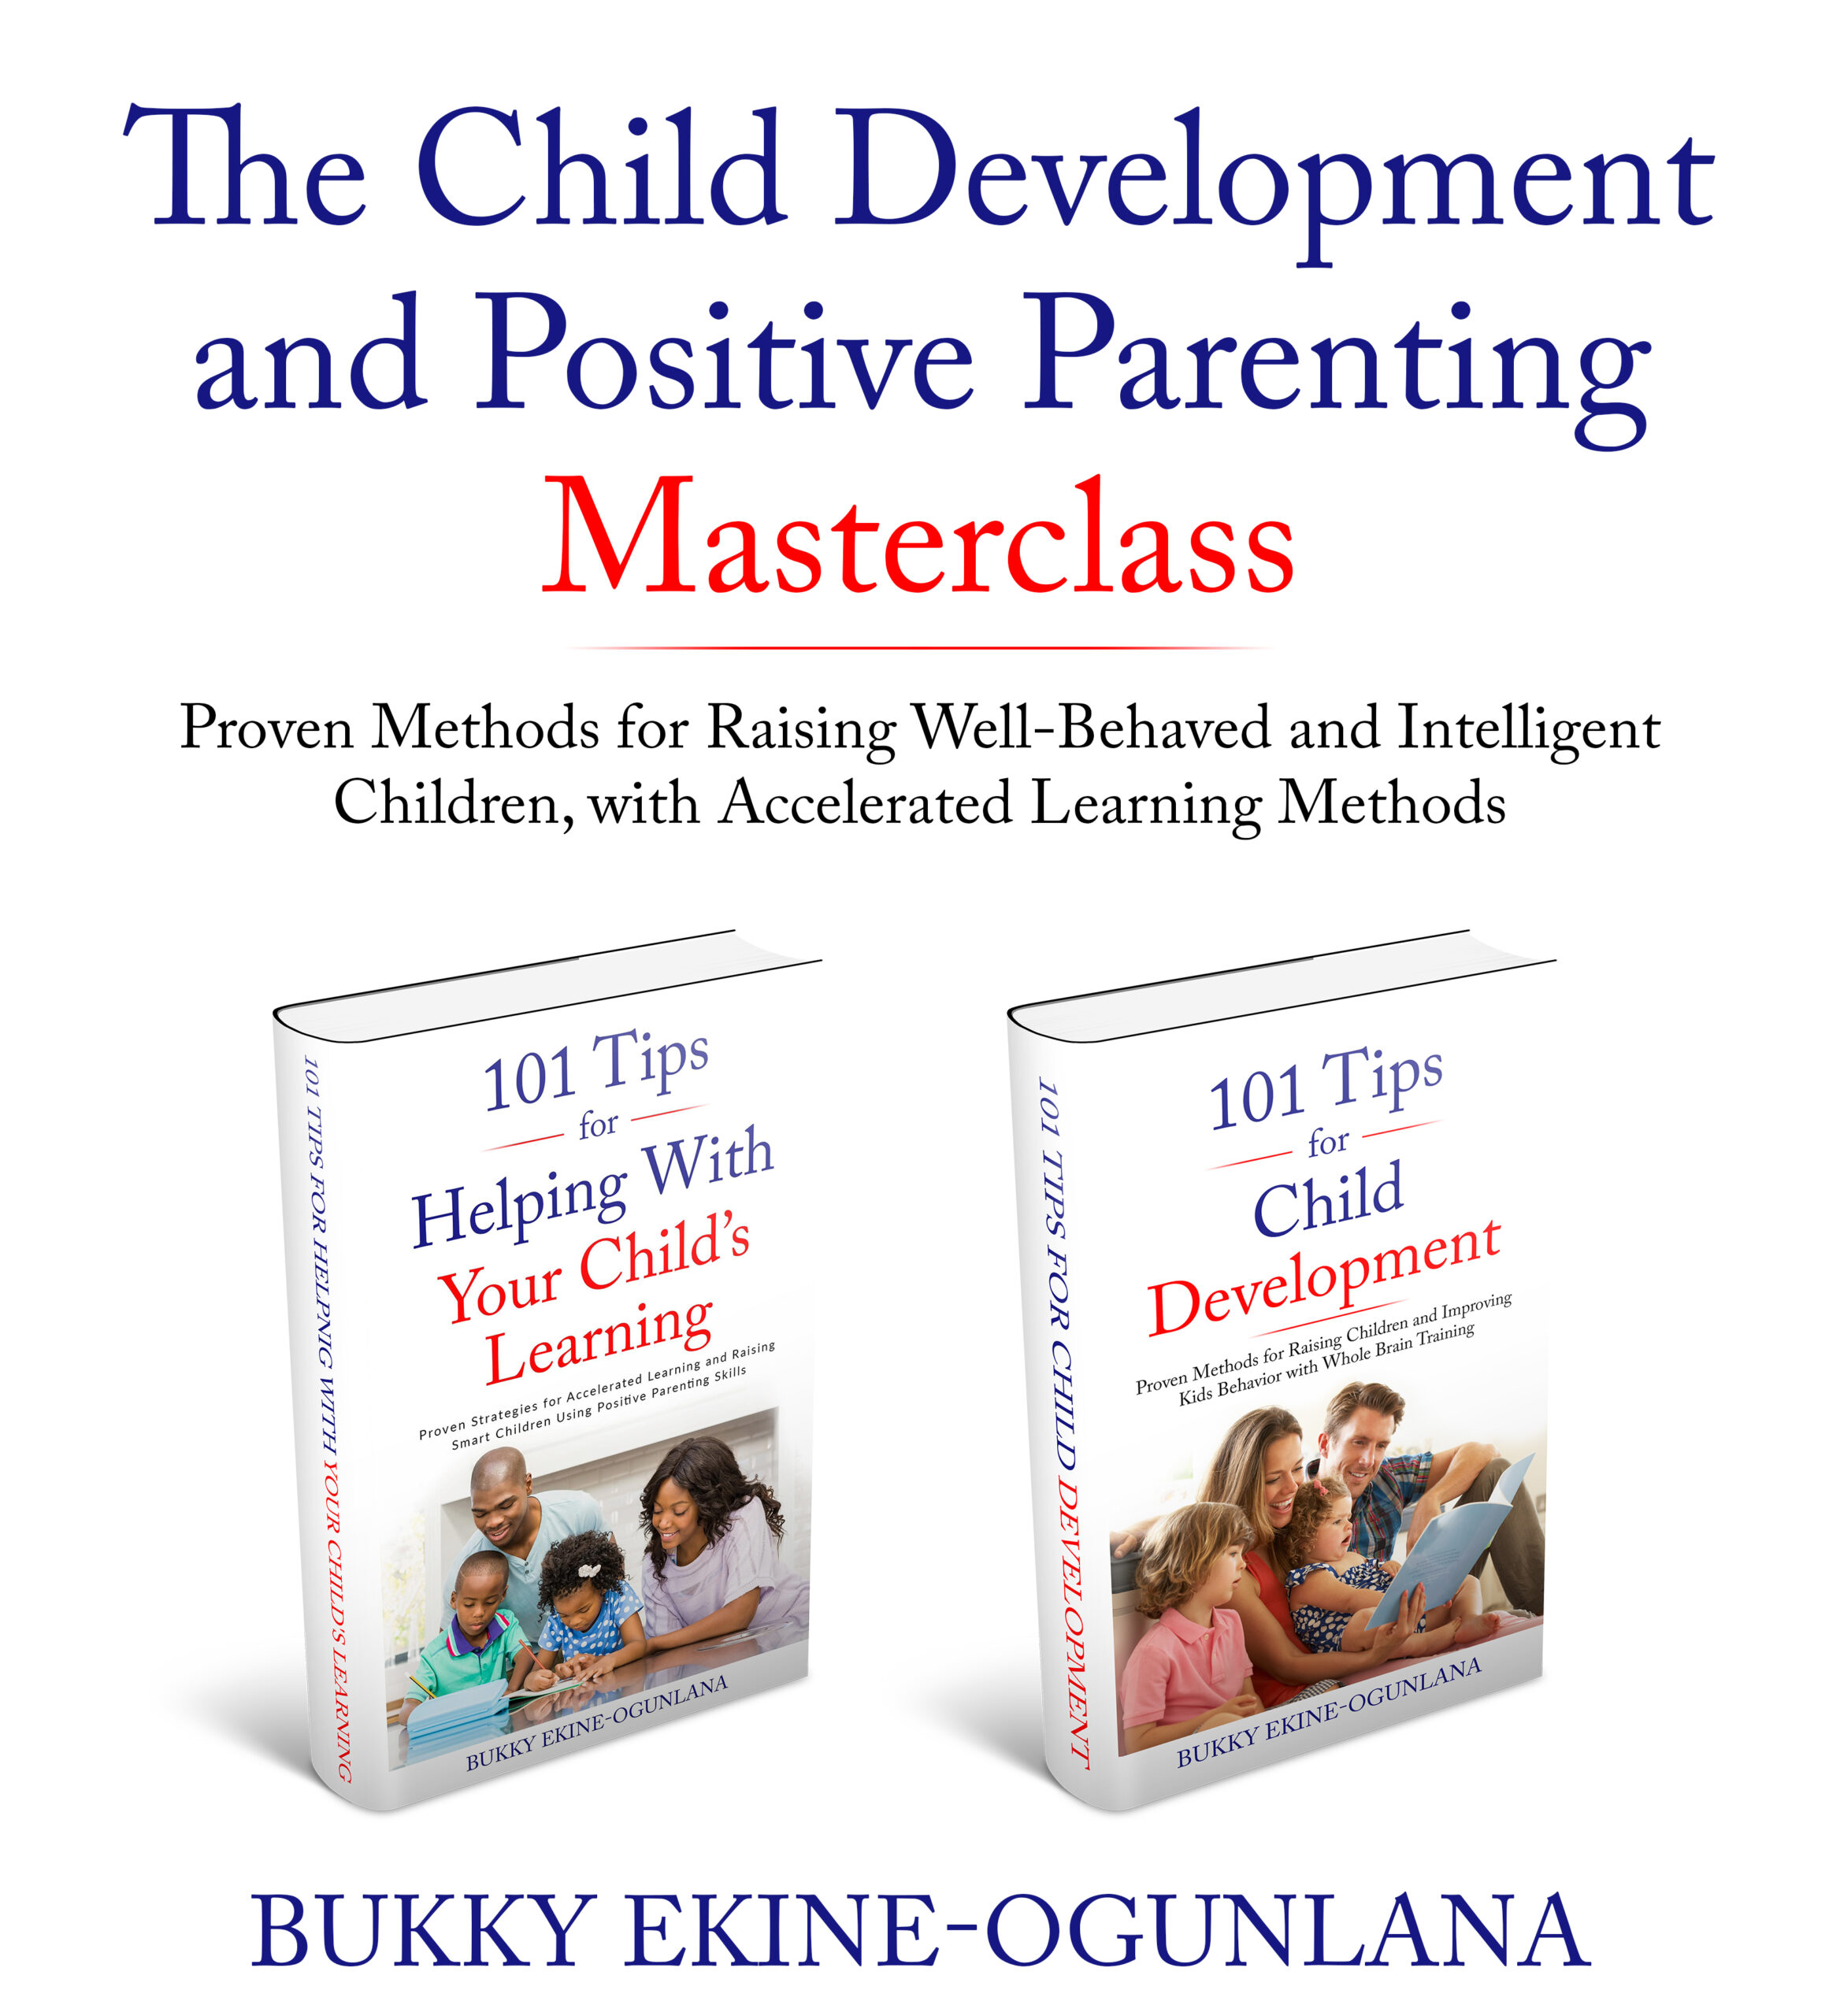 FREE: The Child Development and Positive Parenting Master Class 2-in-1 Bundle: Proven Methods for Raising Well-Behaved and Intelligent Children, with Accelerated Learning Methods by Bukky Ekine-Ogunlana